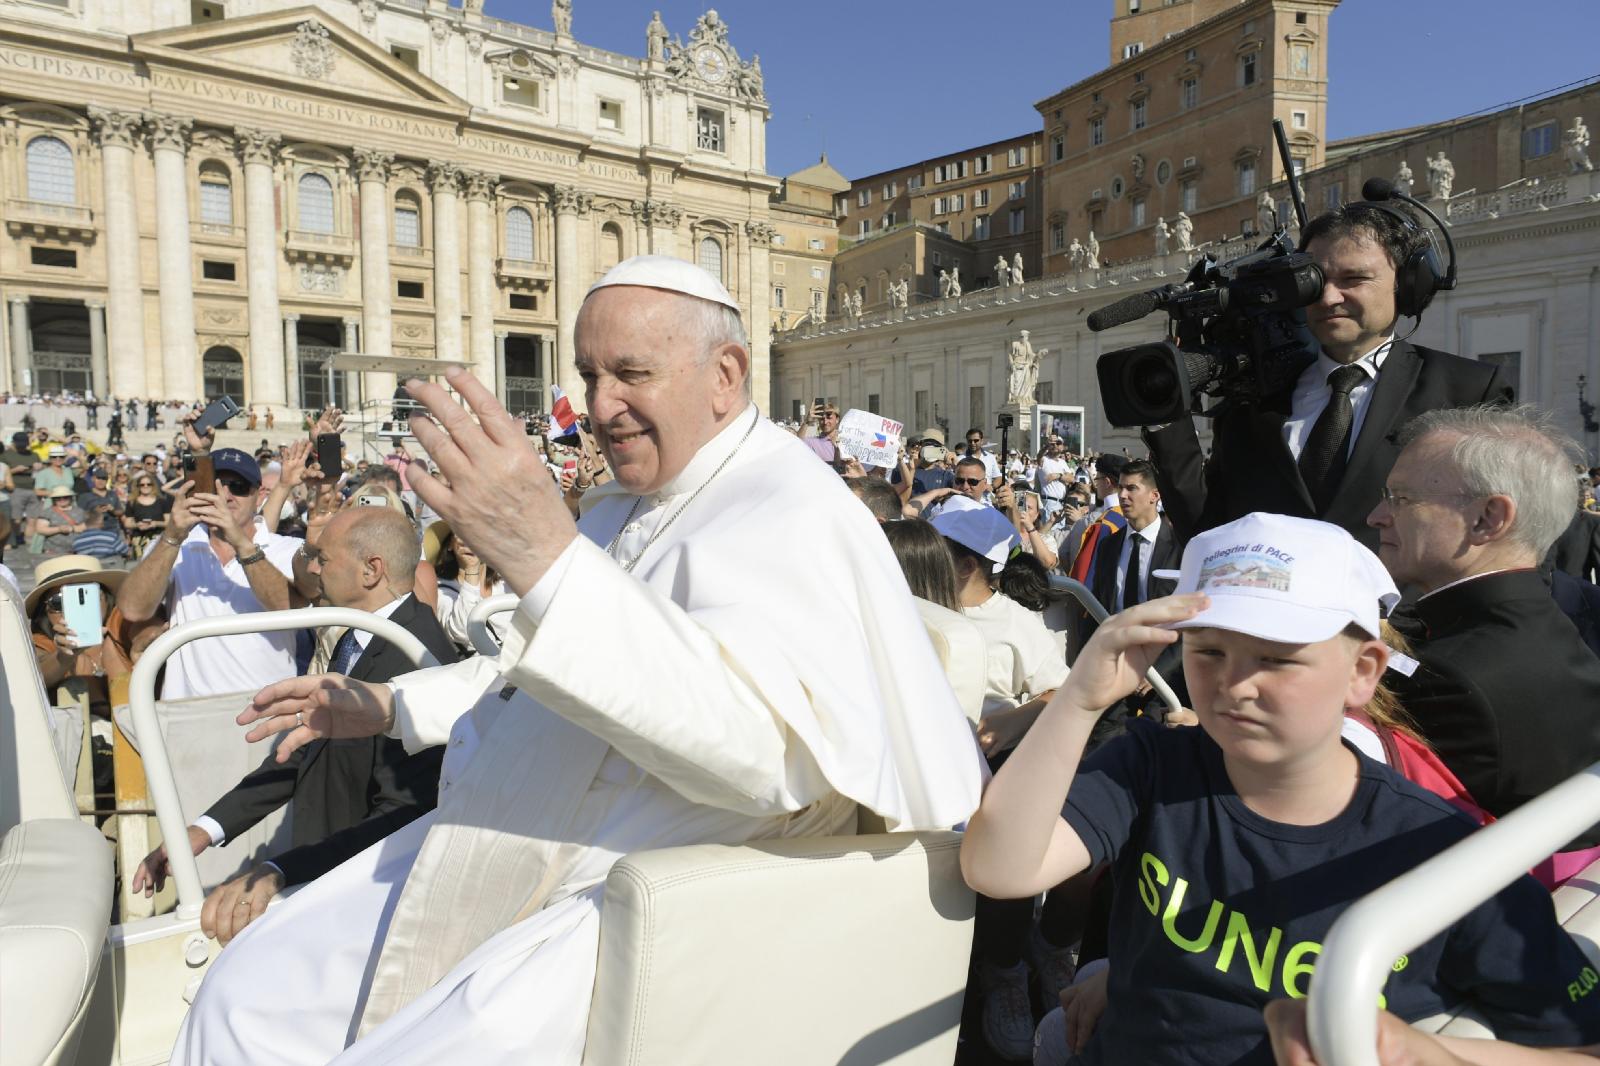 Pope Francis – will he stay or will he go?